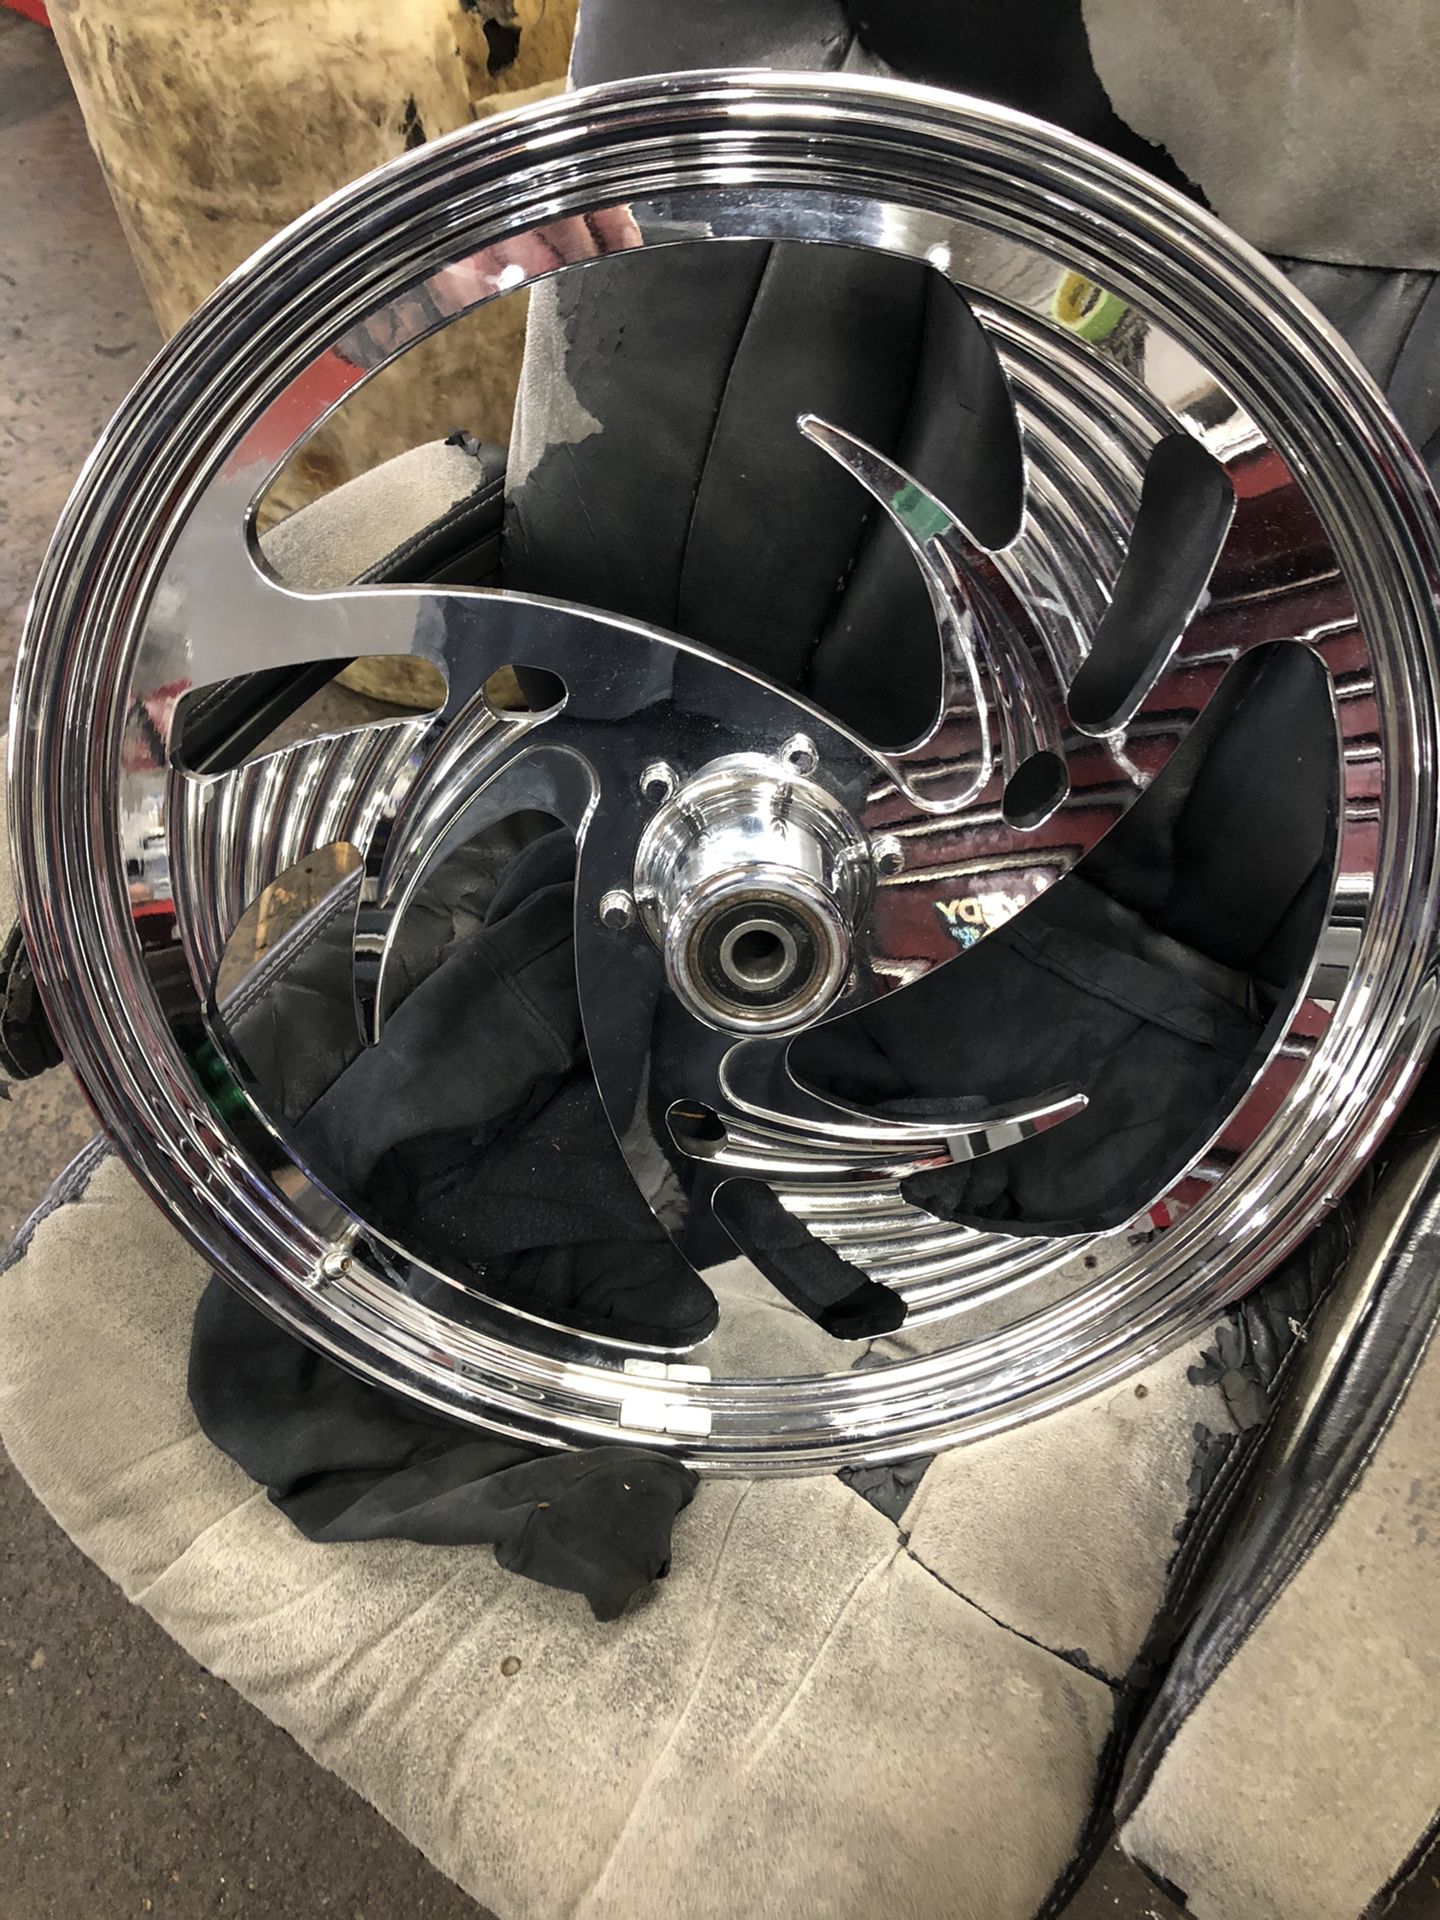 21x2.15 riptide front motorcycle wheel